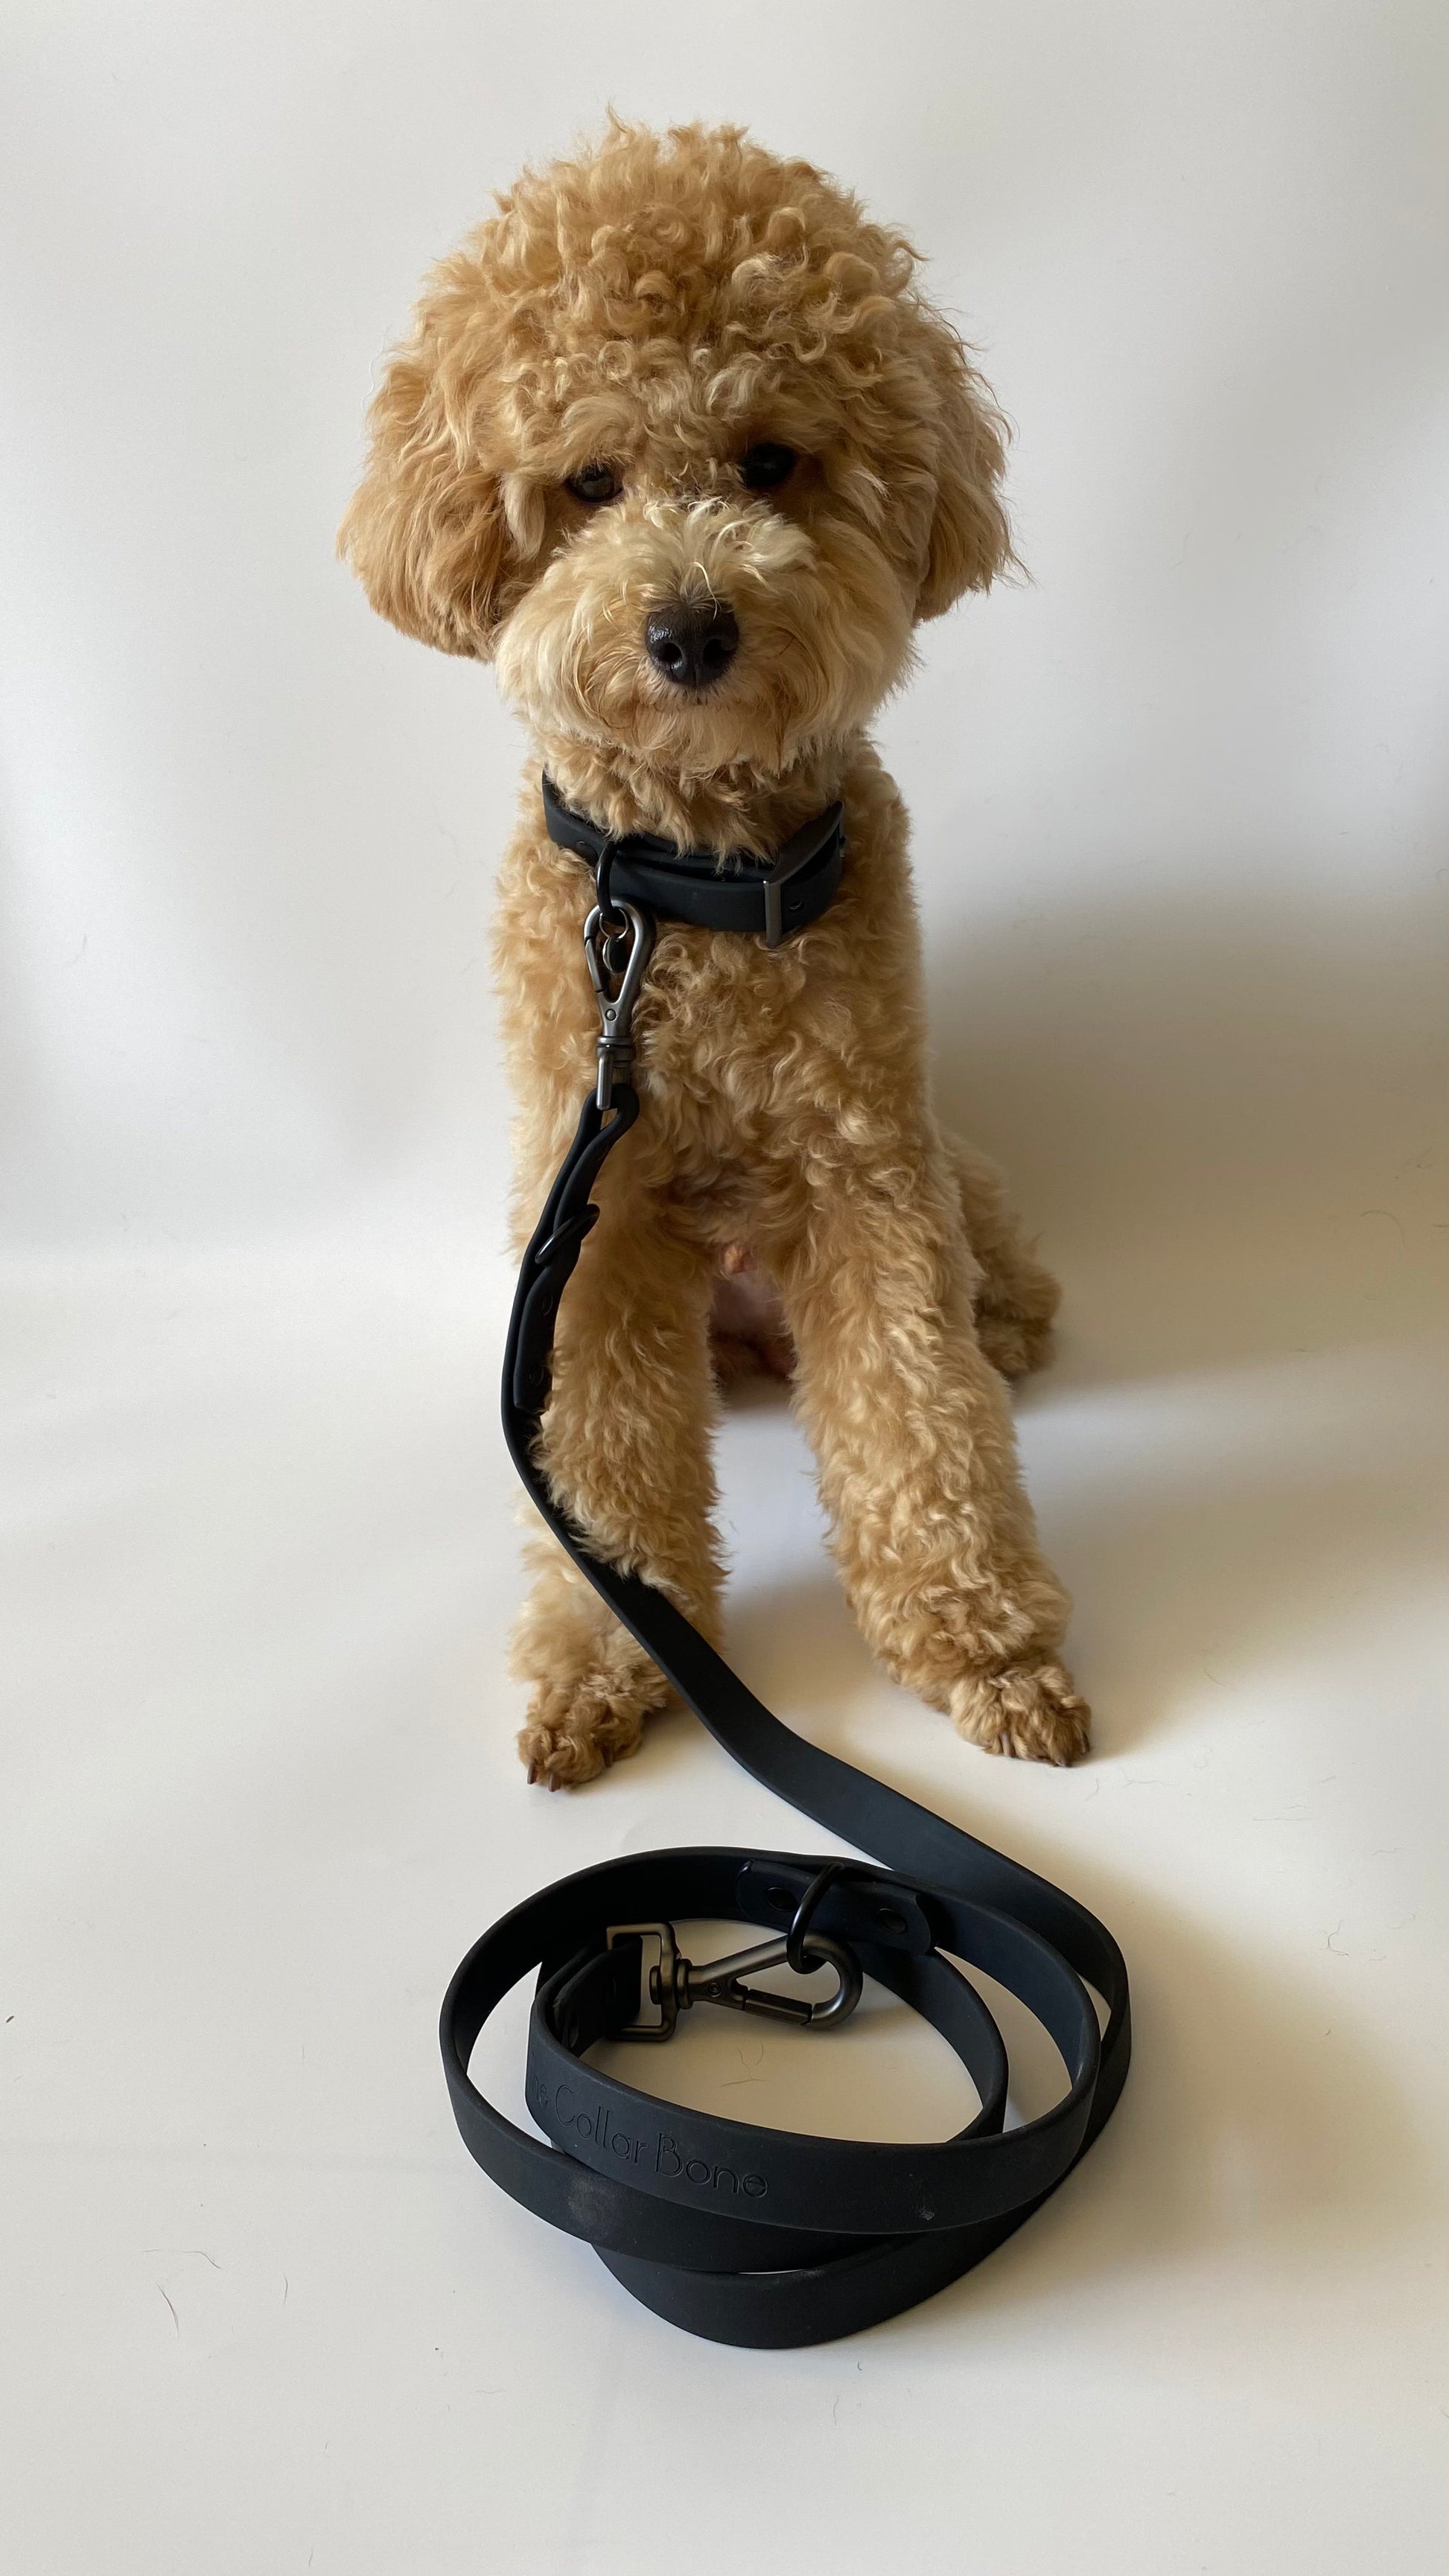 Cory is a toy poodle weighing around 4kg. His neck size is 26cm and wearing size S collar. #toypoodle #waterproofcollarandleash